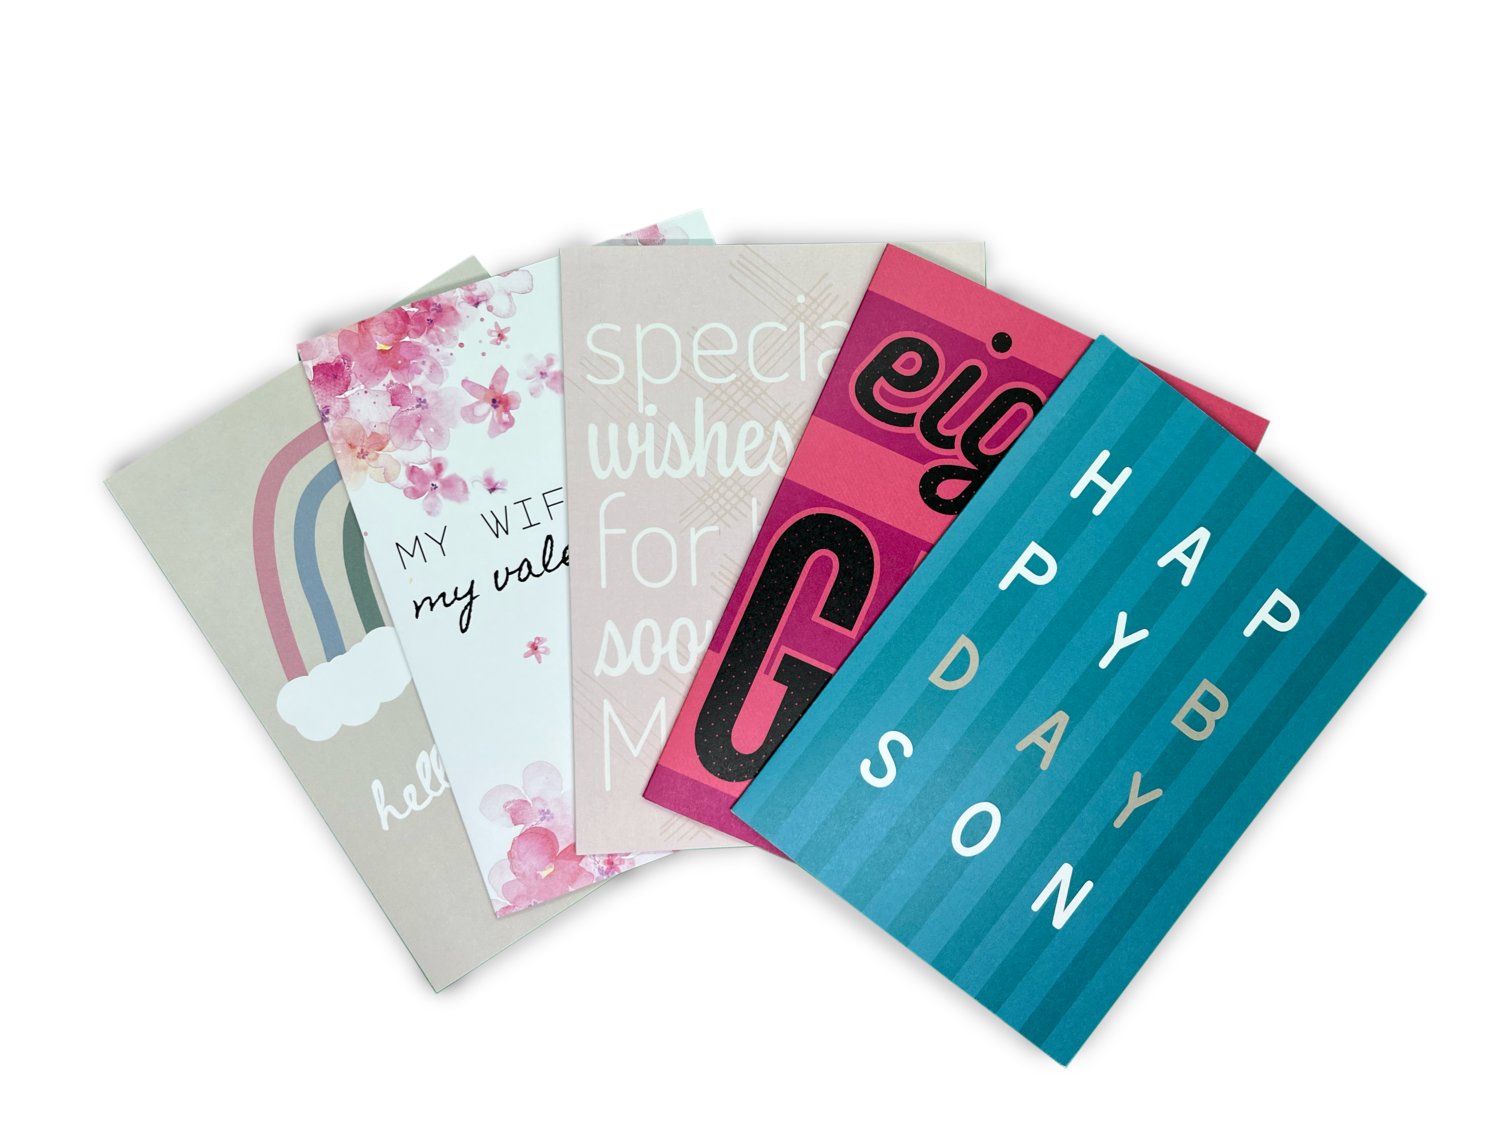 Greet on Repeat greeting cards.